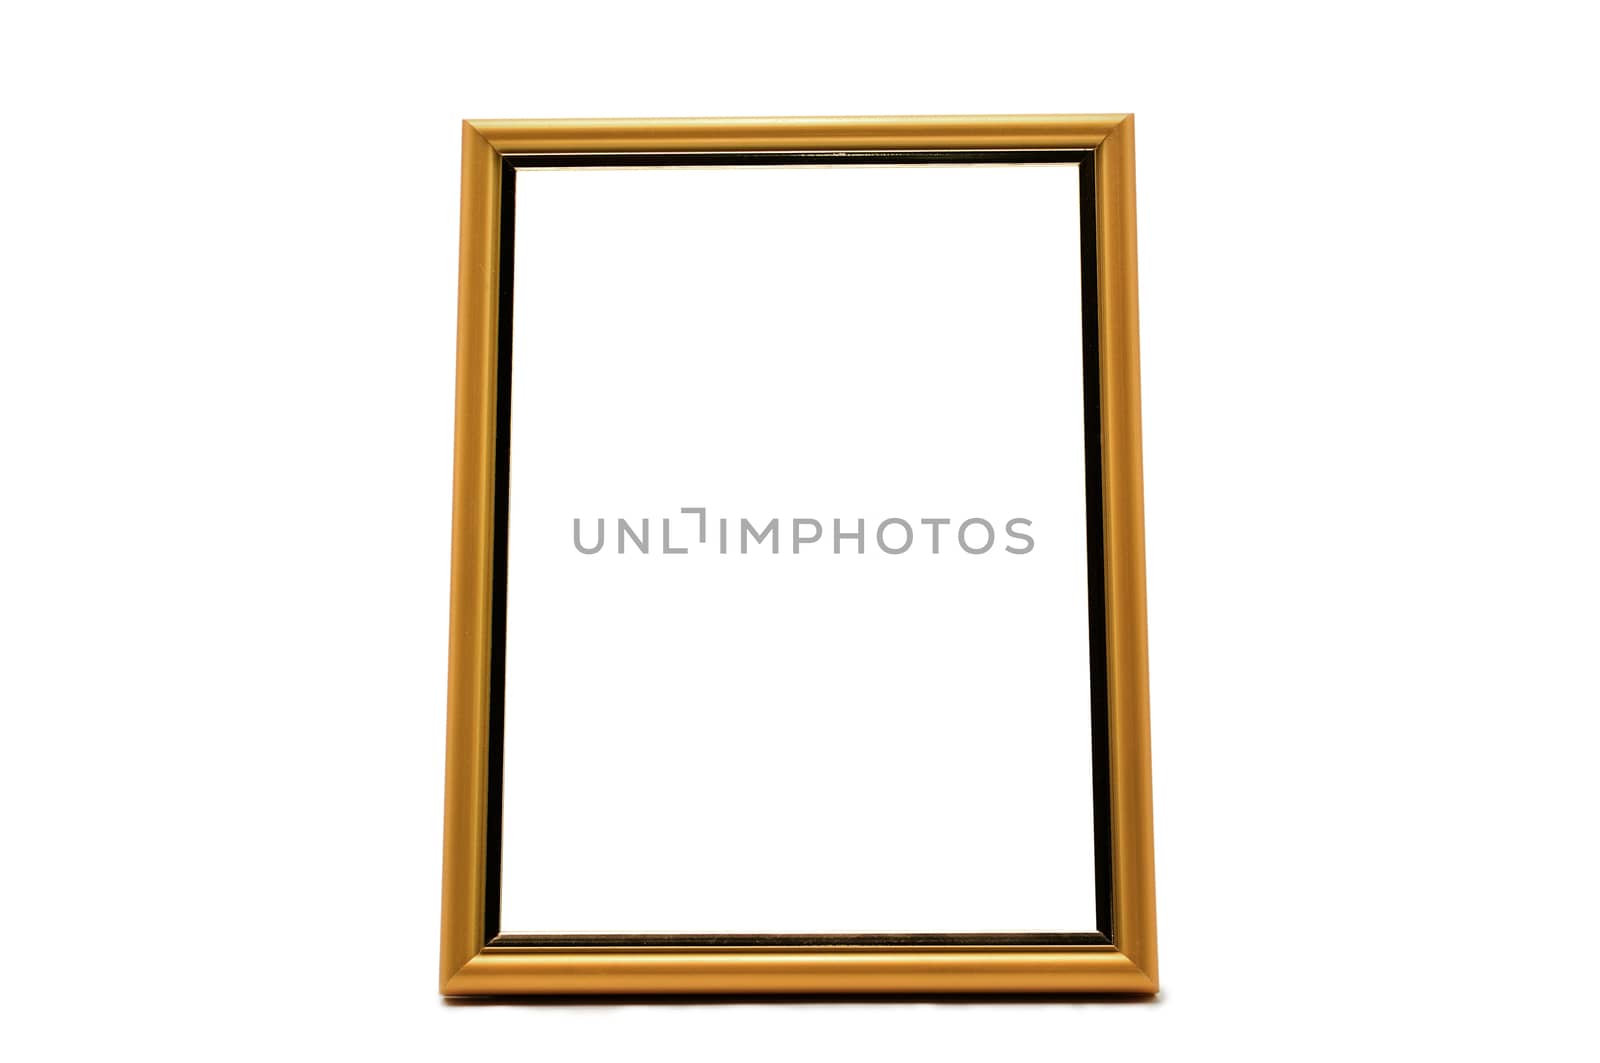 Antique wooden and golden photo frame on an isolated white backg by moviephoto